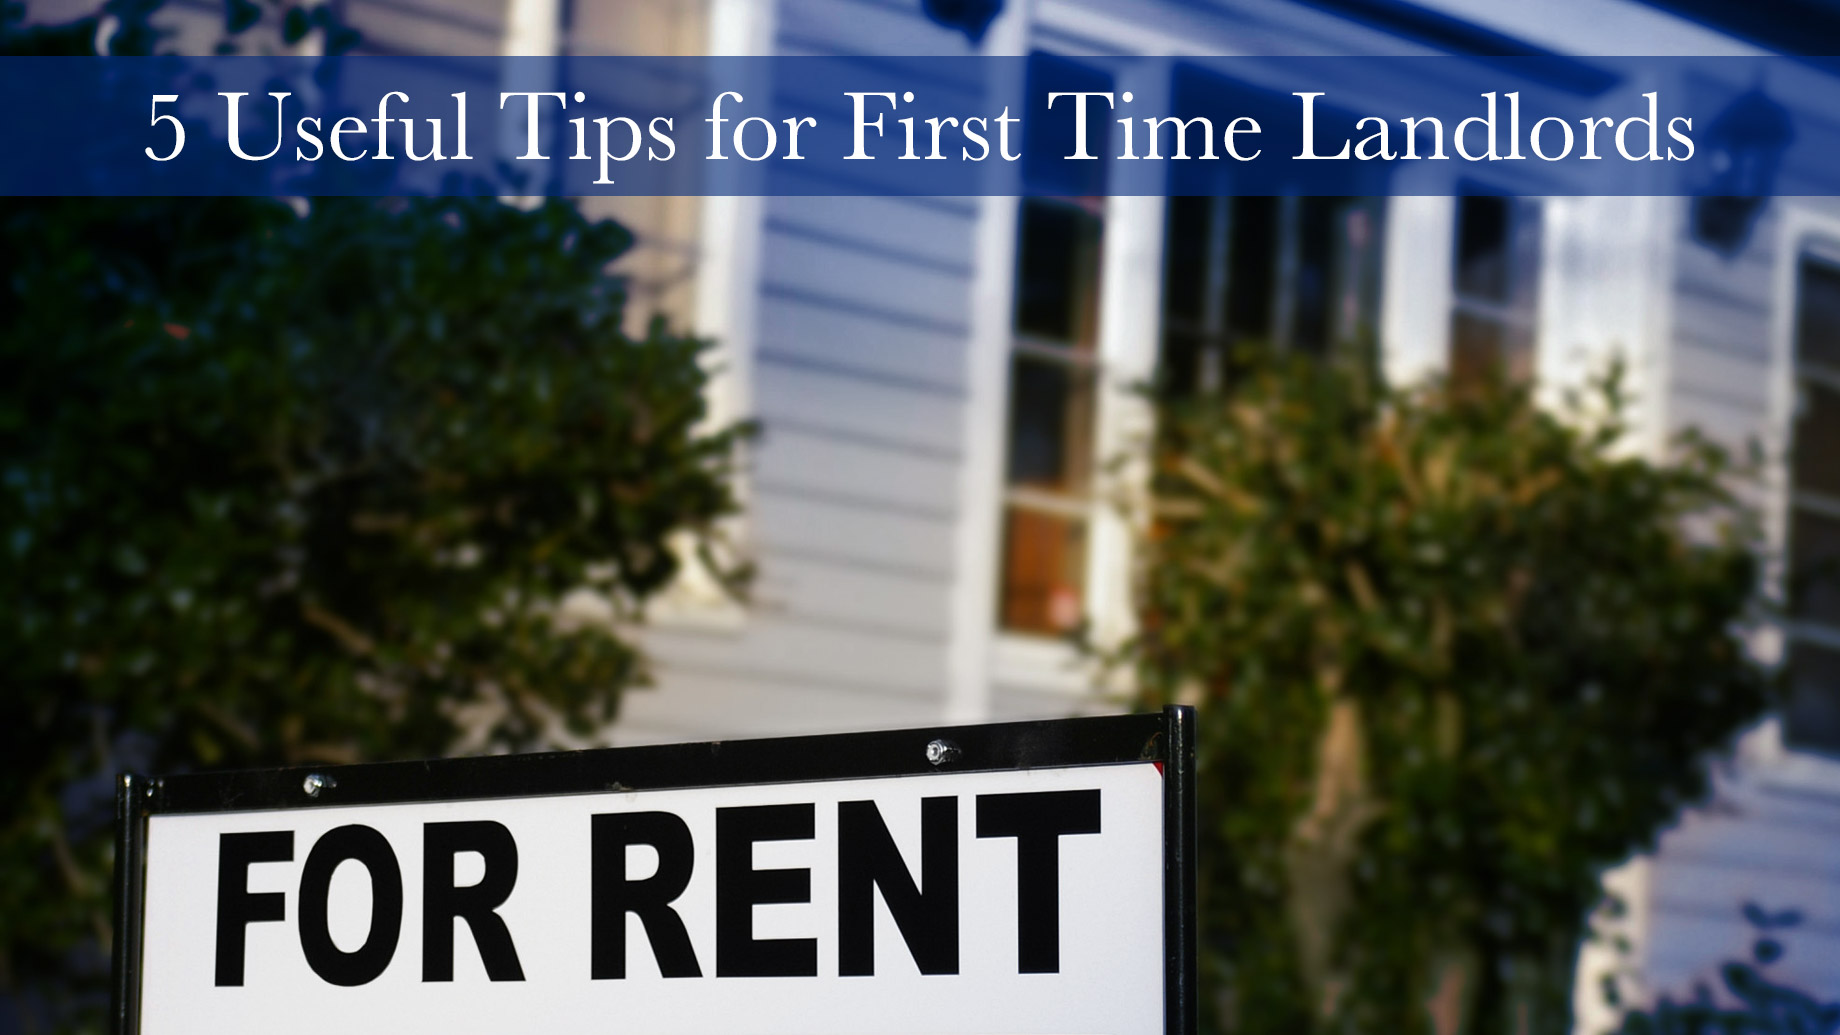 5 Useful Tips for First Time Landlords